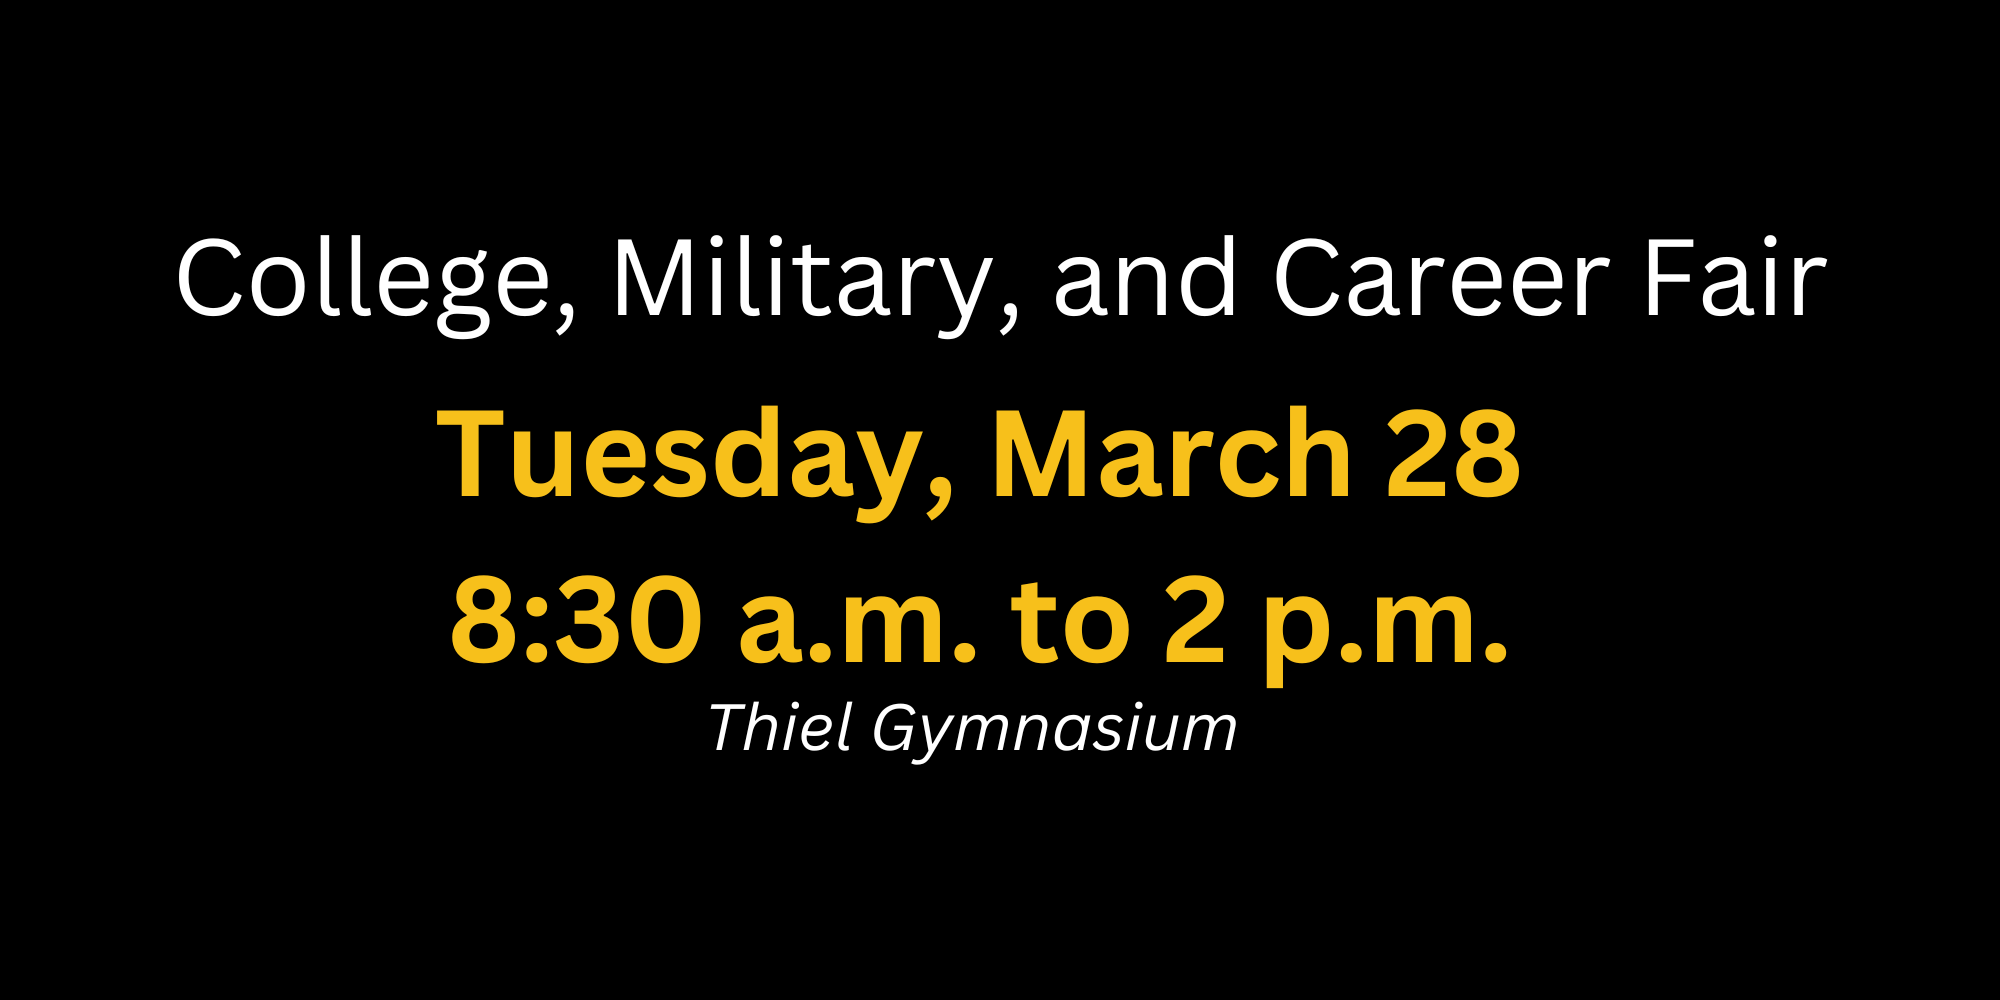 College, Military and Career Fair, Tuesday, March 28, 8:30 a.m. to 2 p.m. Thiel Gymnasium 